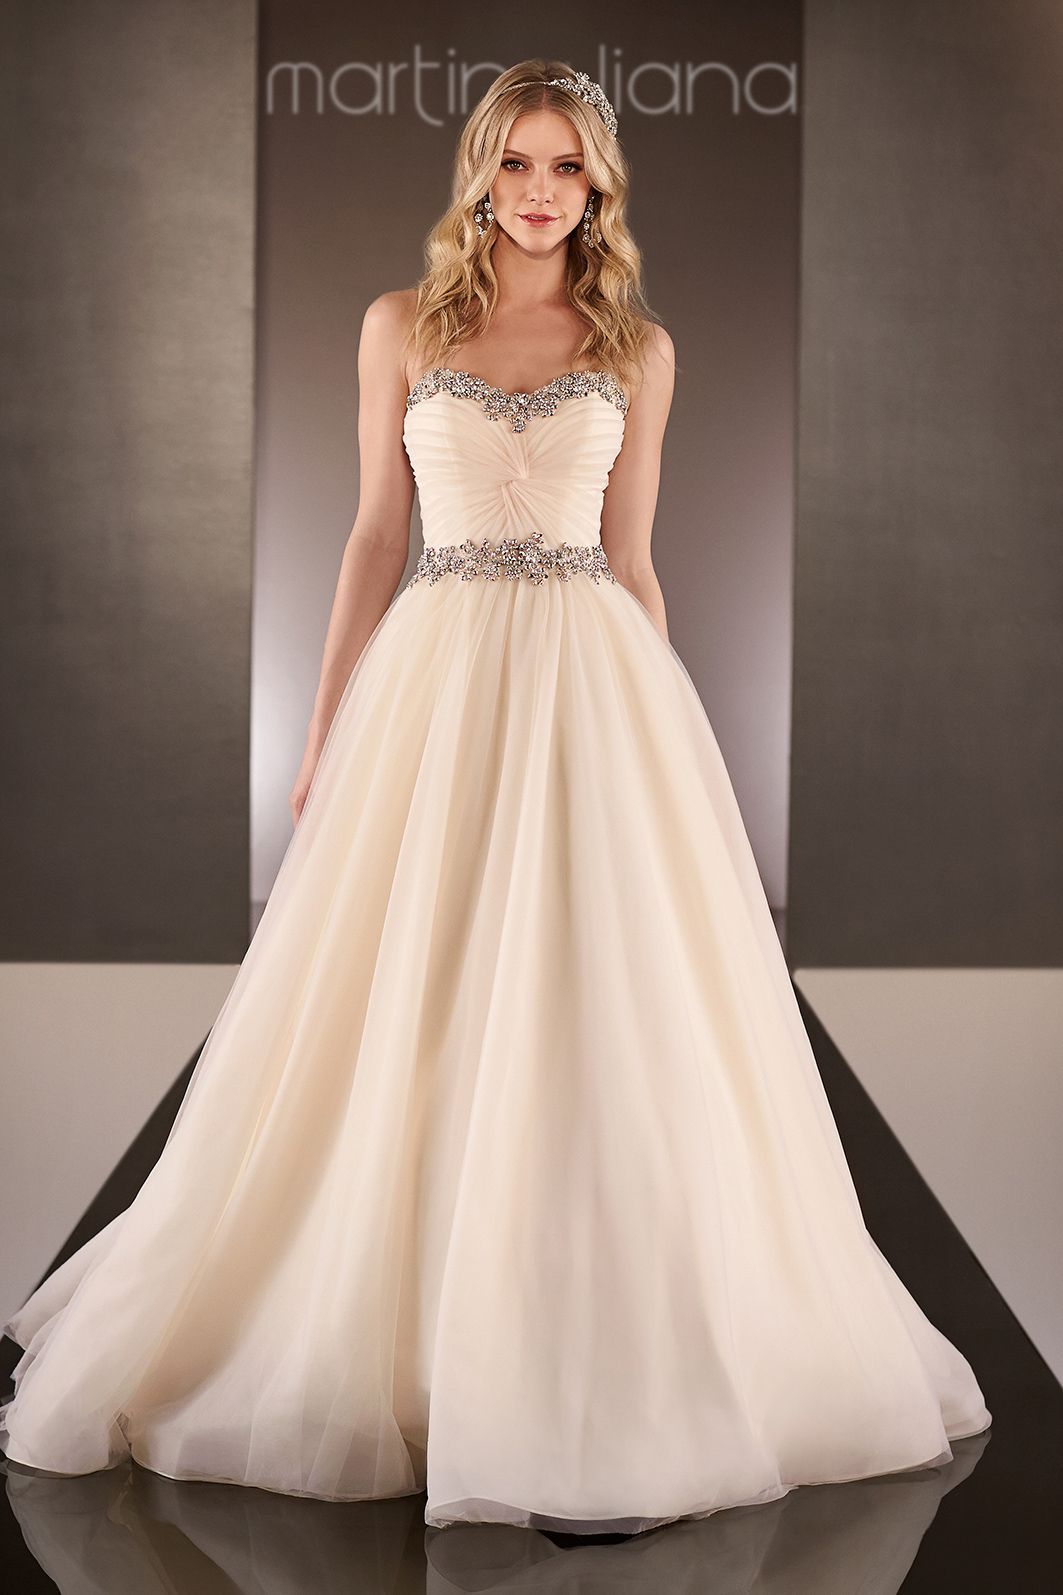 The most popular wedding gowns of 2014: Martina Liana, Style 572